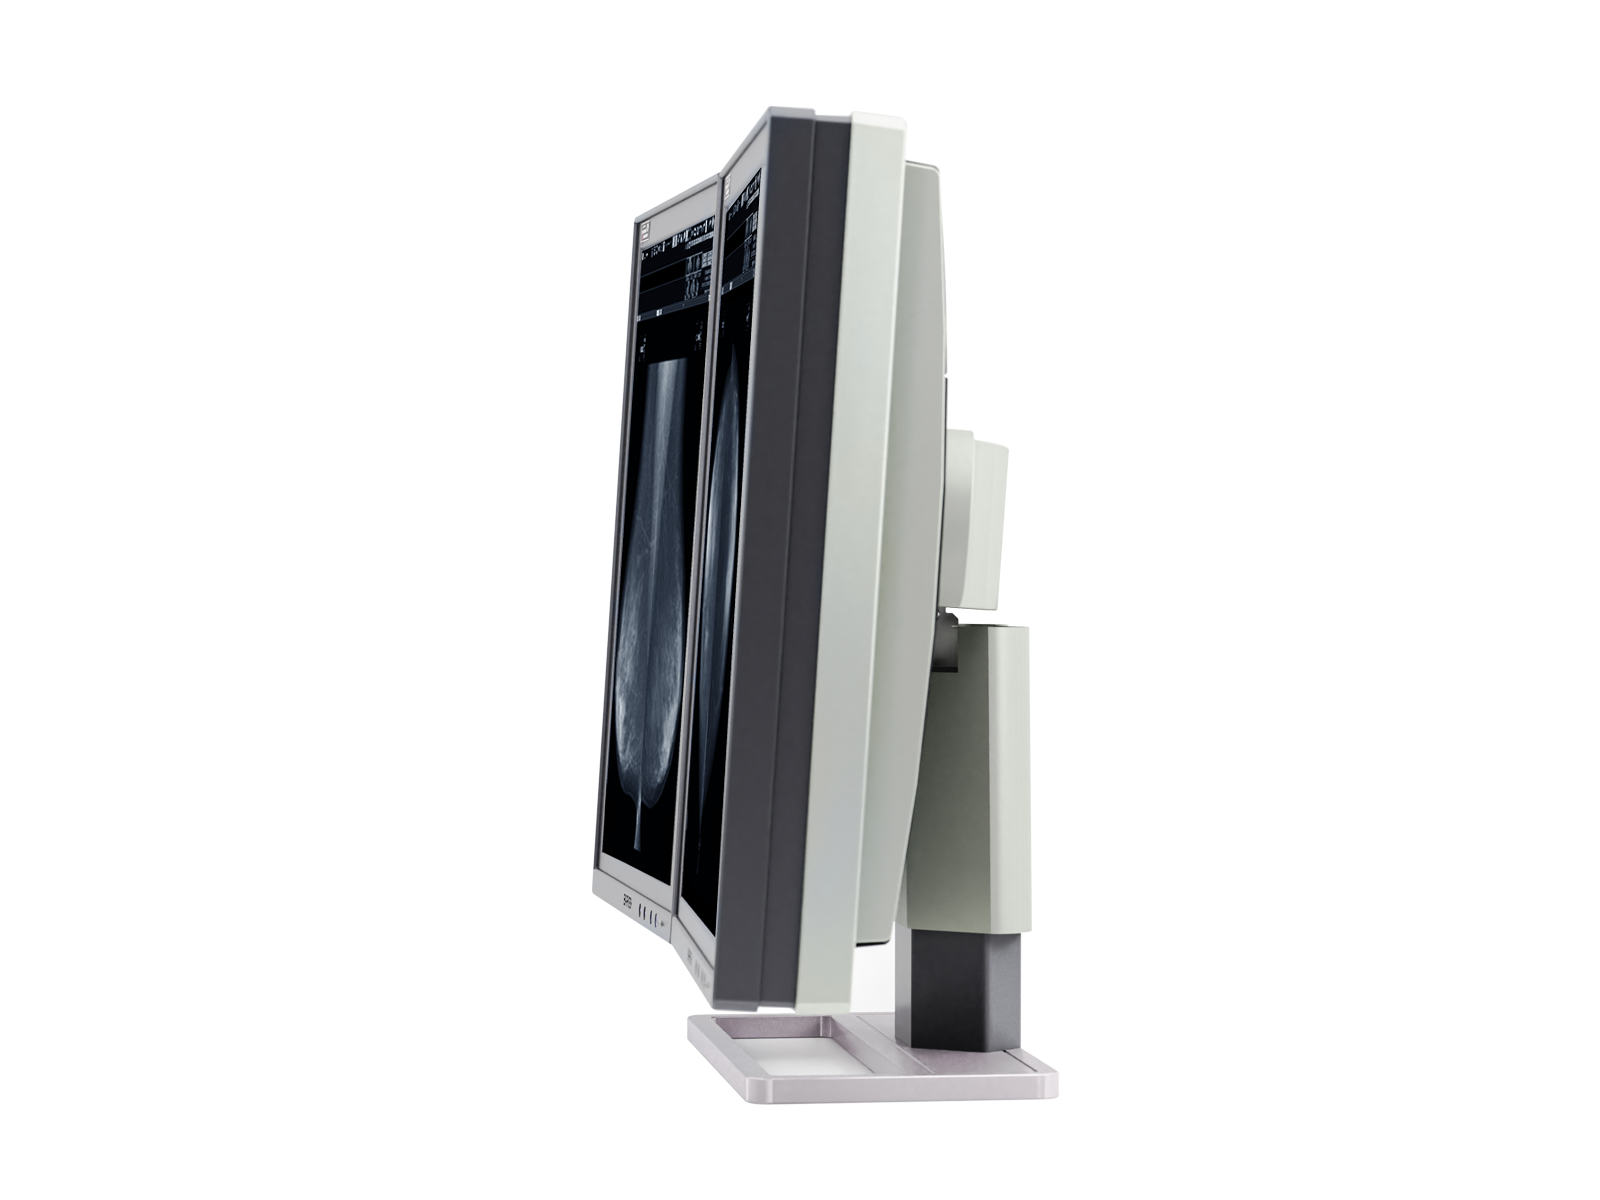 Barco Coronis MDMG-5221 5MP 21.3" Grayscale Tomosynthesis LED 3D-DBT Mammography Display